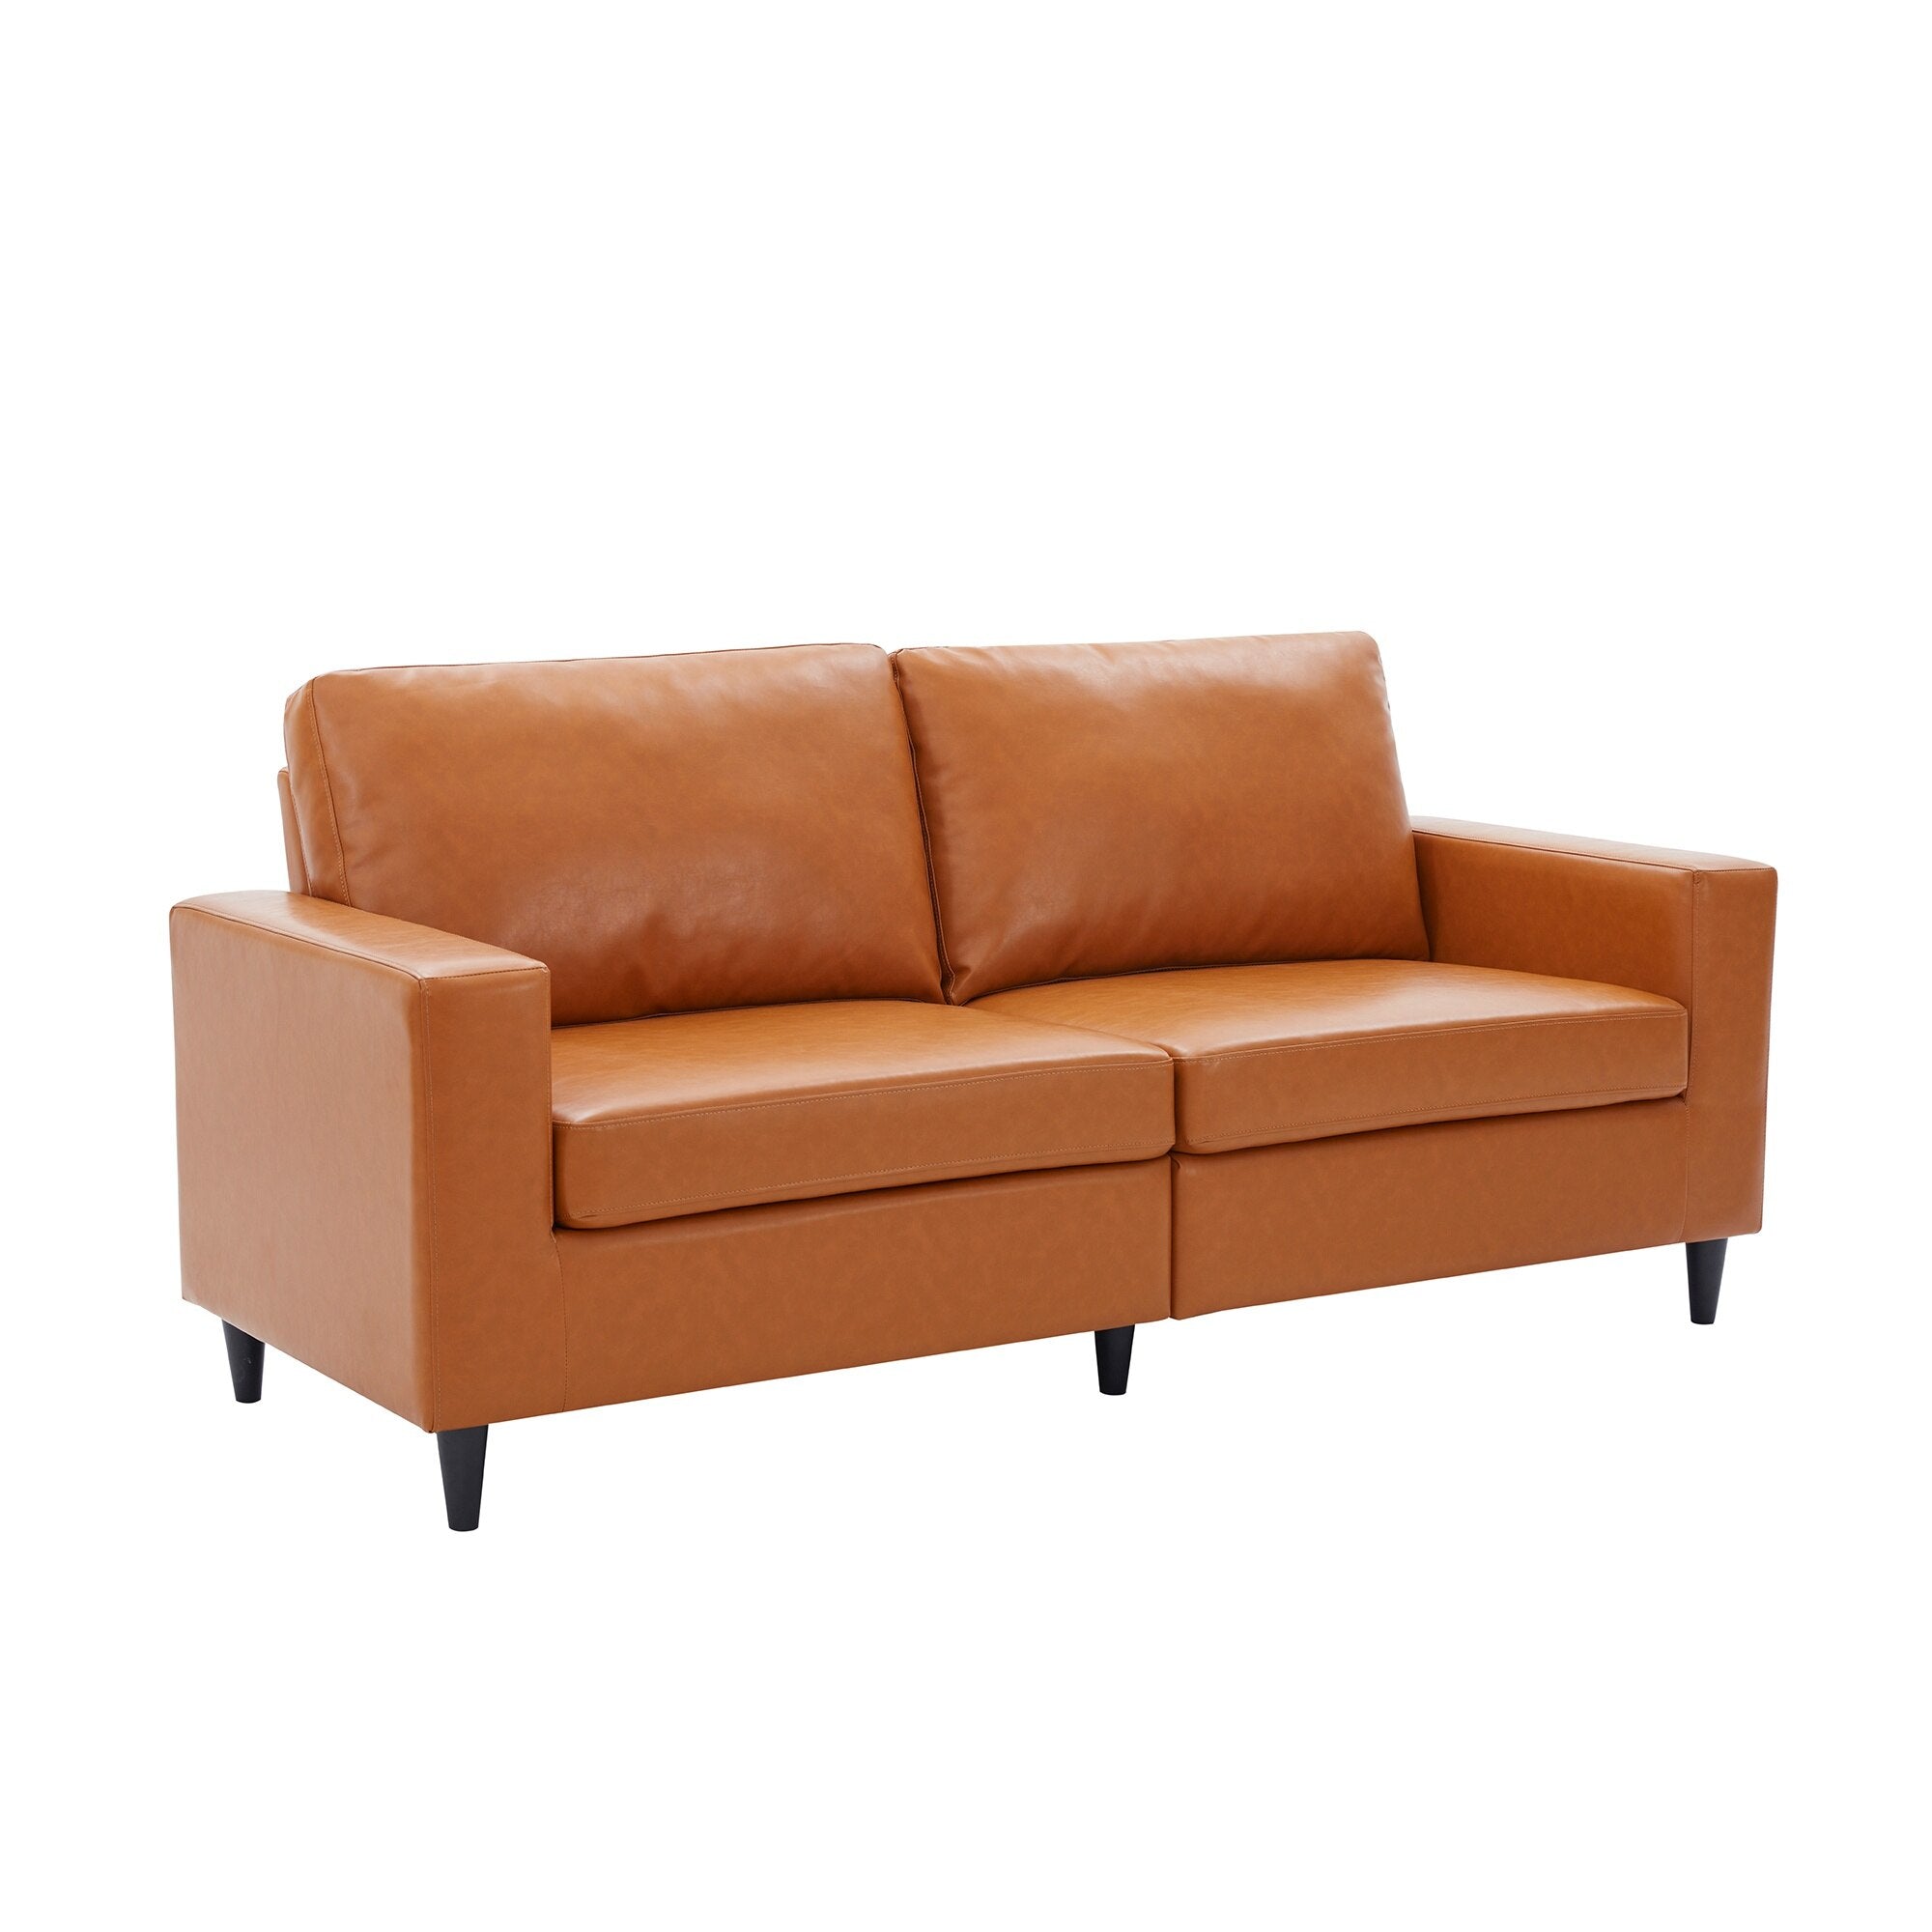 Furniture  Modern Style  3 Seat Sofa  PU Leather Upholstered Couch Furniture for Home or Office (3-Seat Sofa)